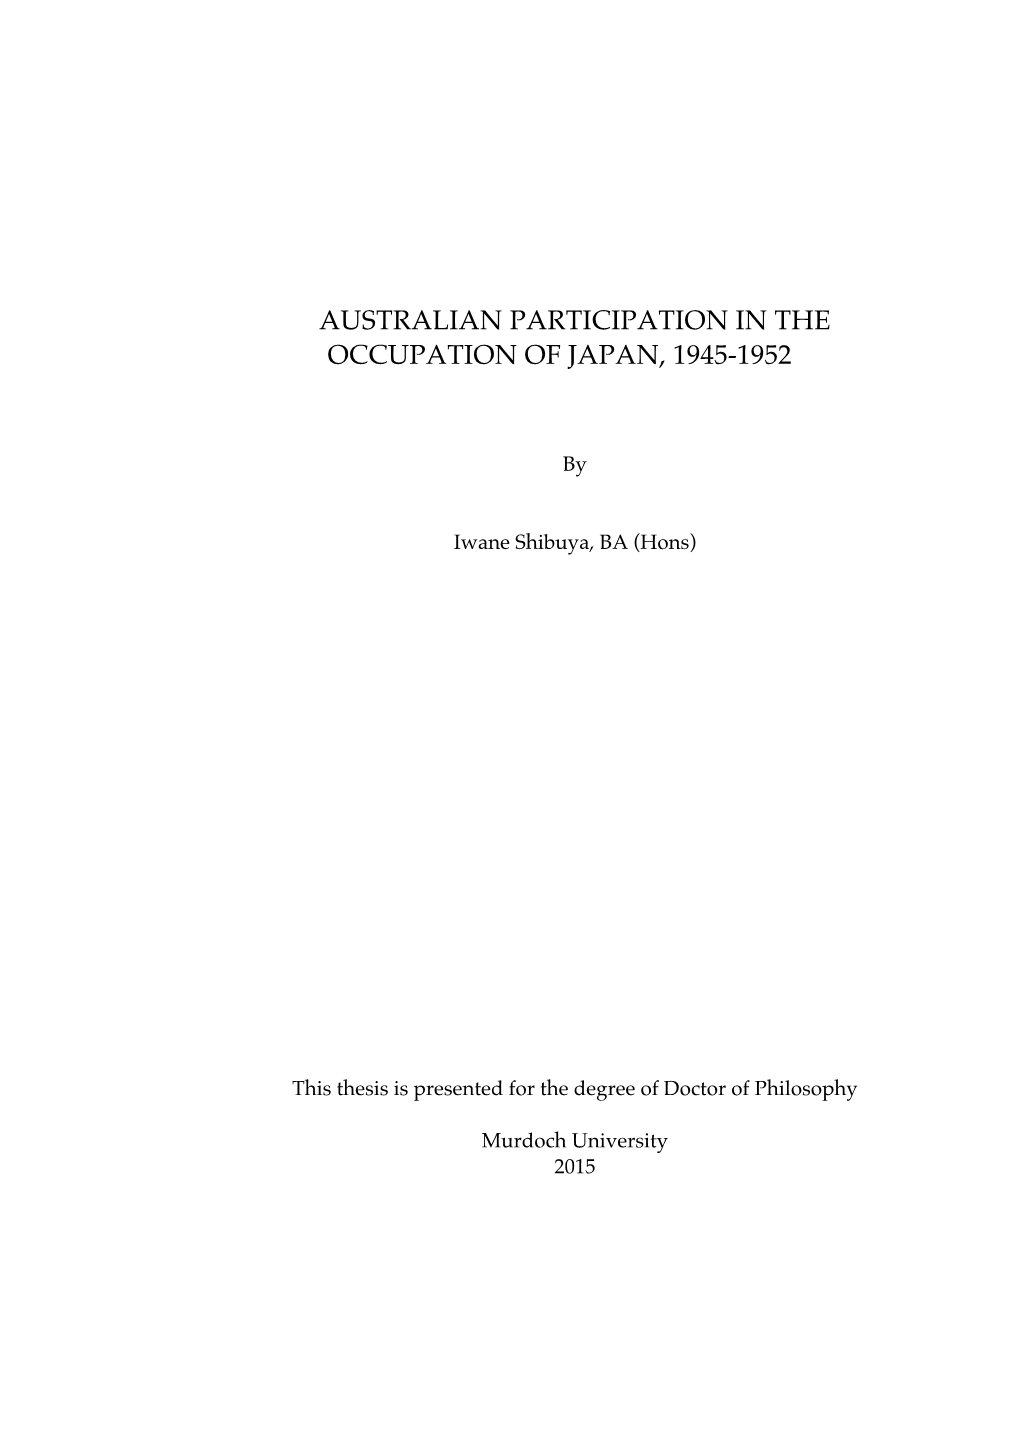 Australian Participation in the Occupation of Japan, 1945-1952